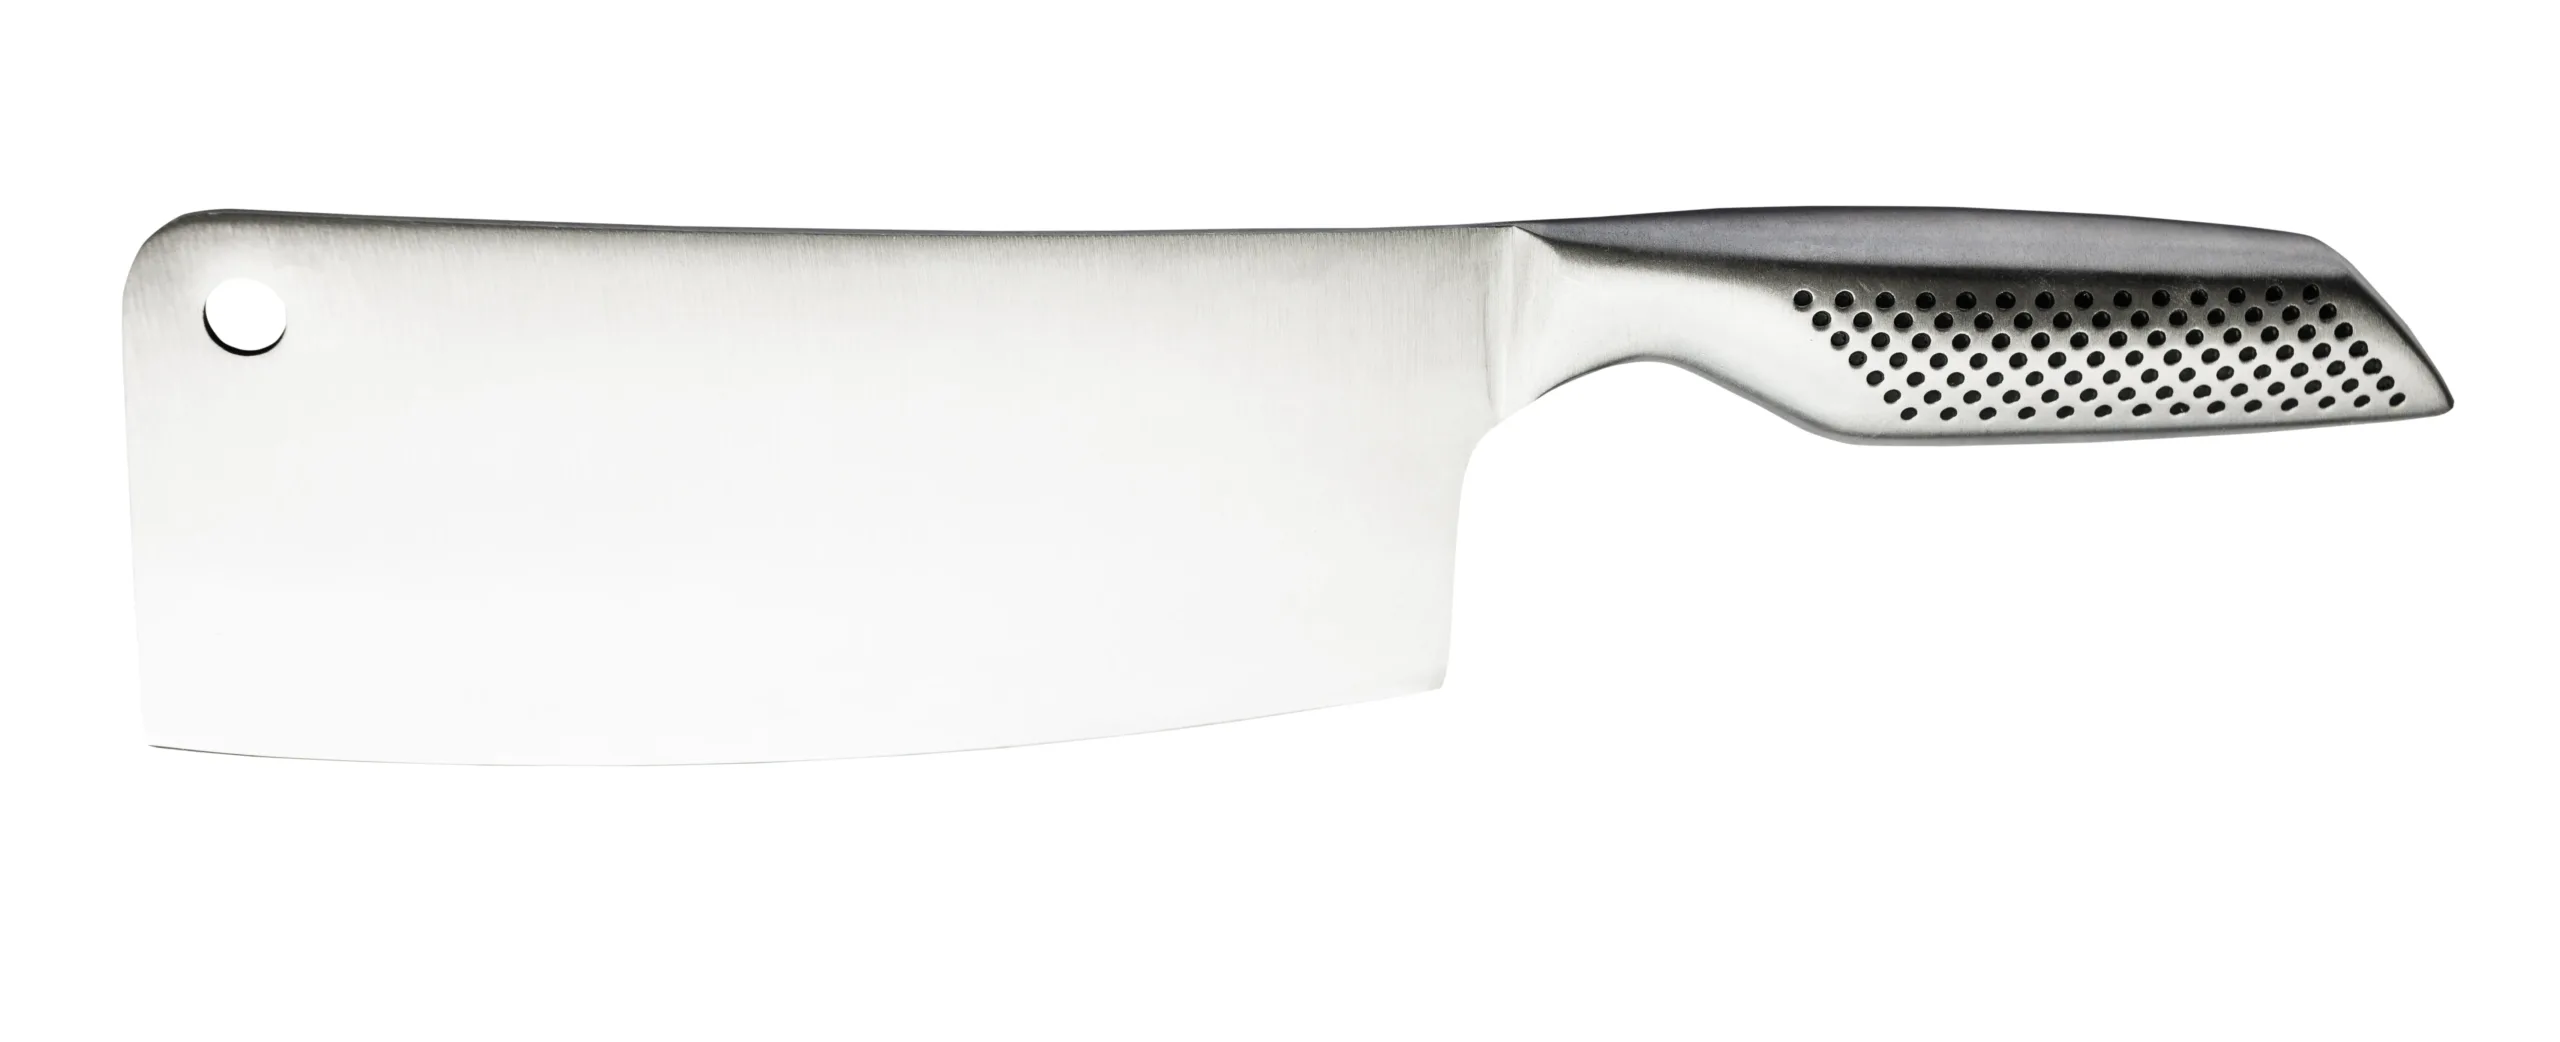 Cleaver Knife - Chef's Deal